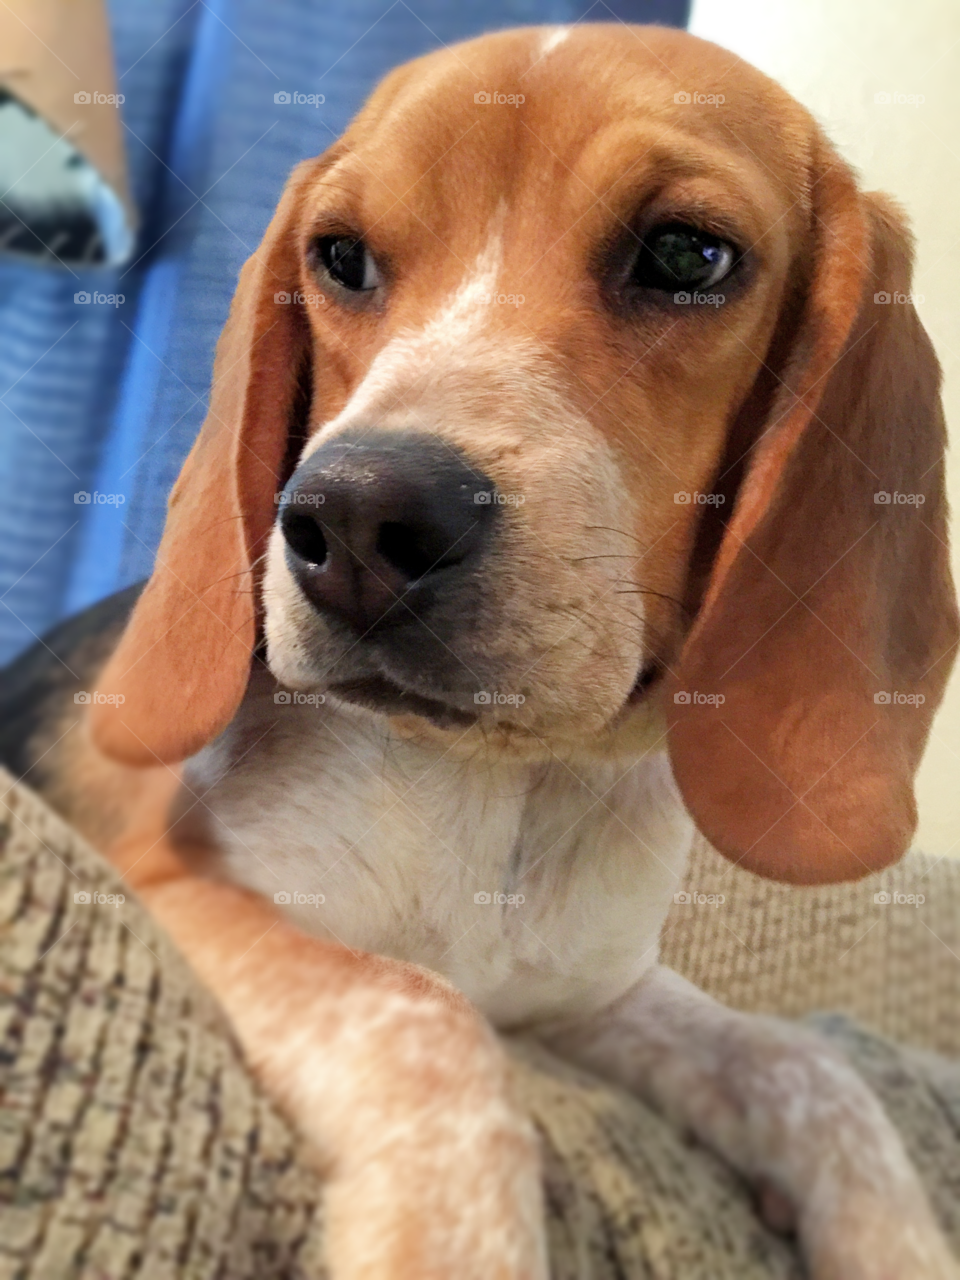 AKC for blood beagles puppy ginger. 